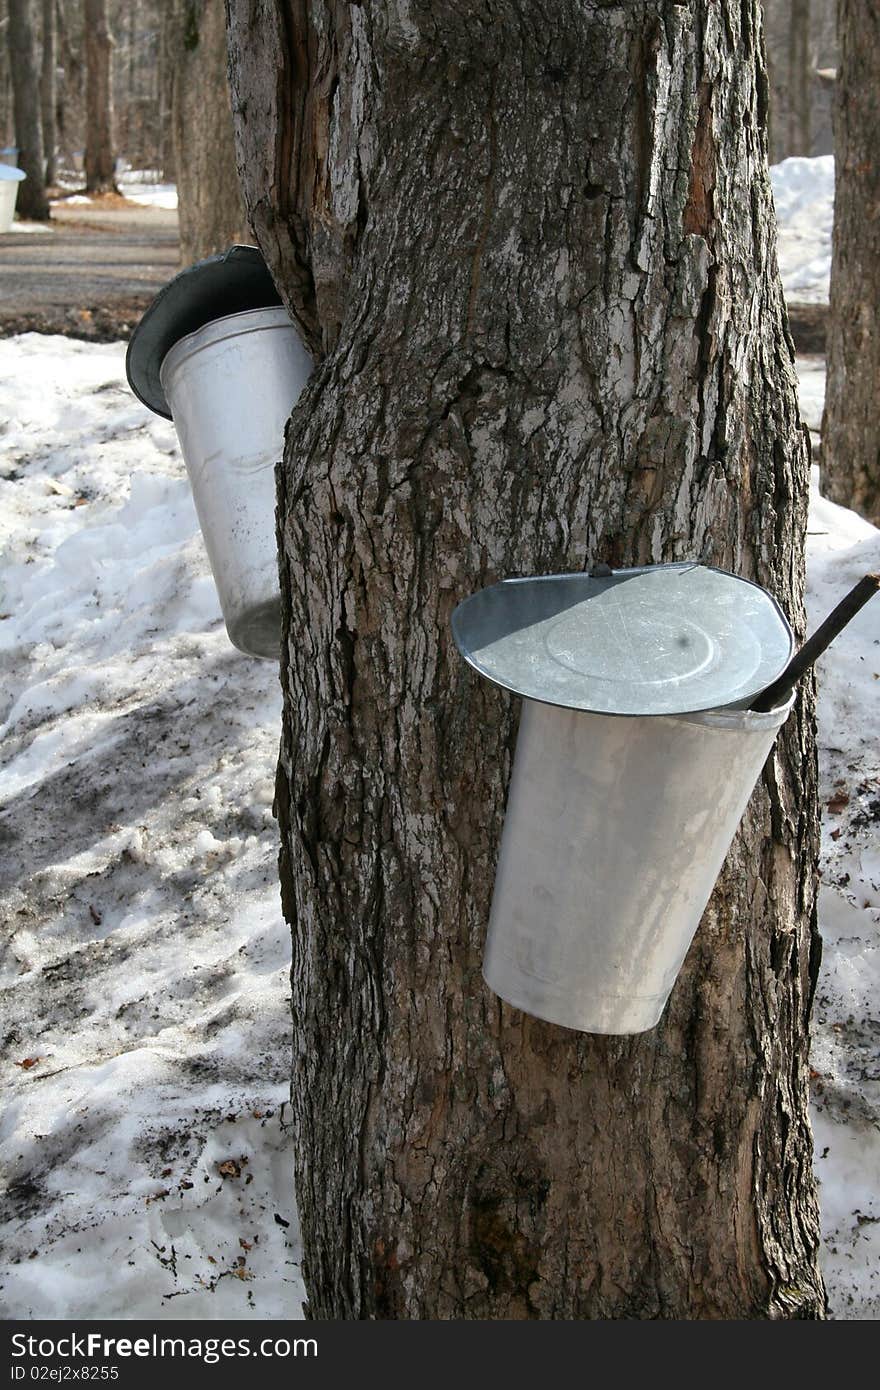 Collecting sap from a maple tree for maple syrup. Collecting sap from a maple tree for maple syrup